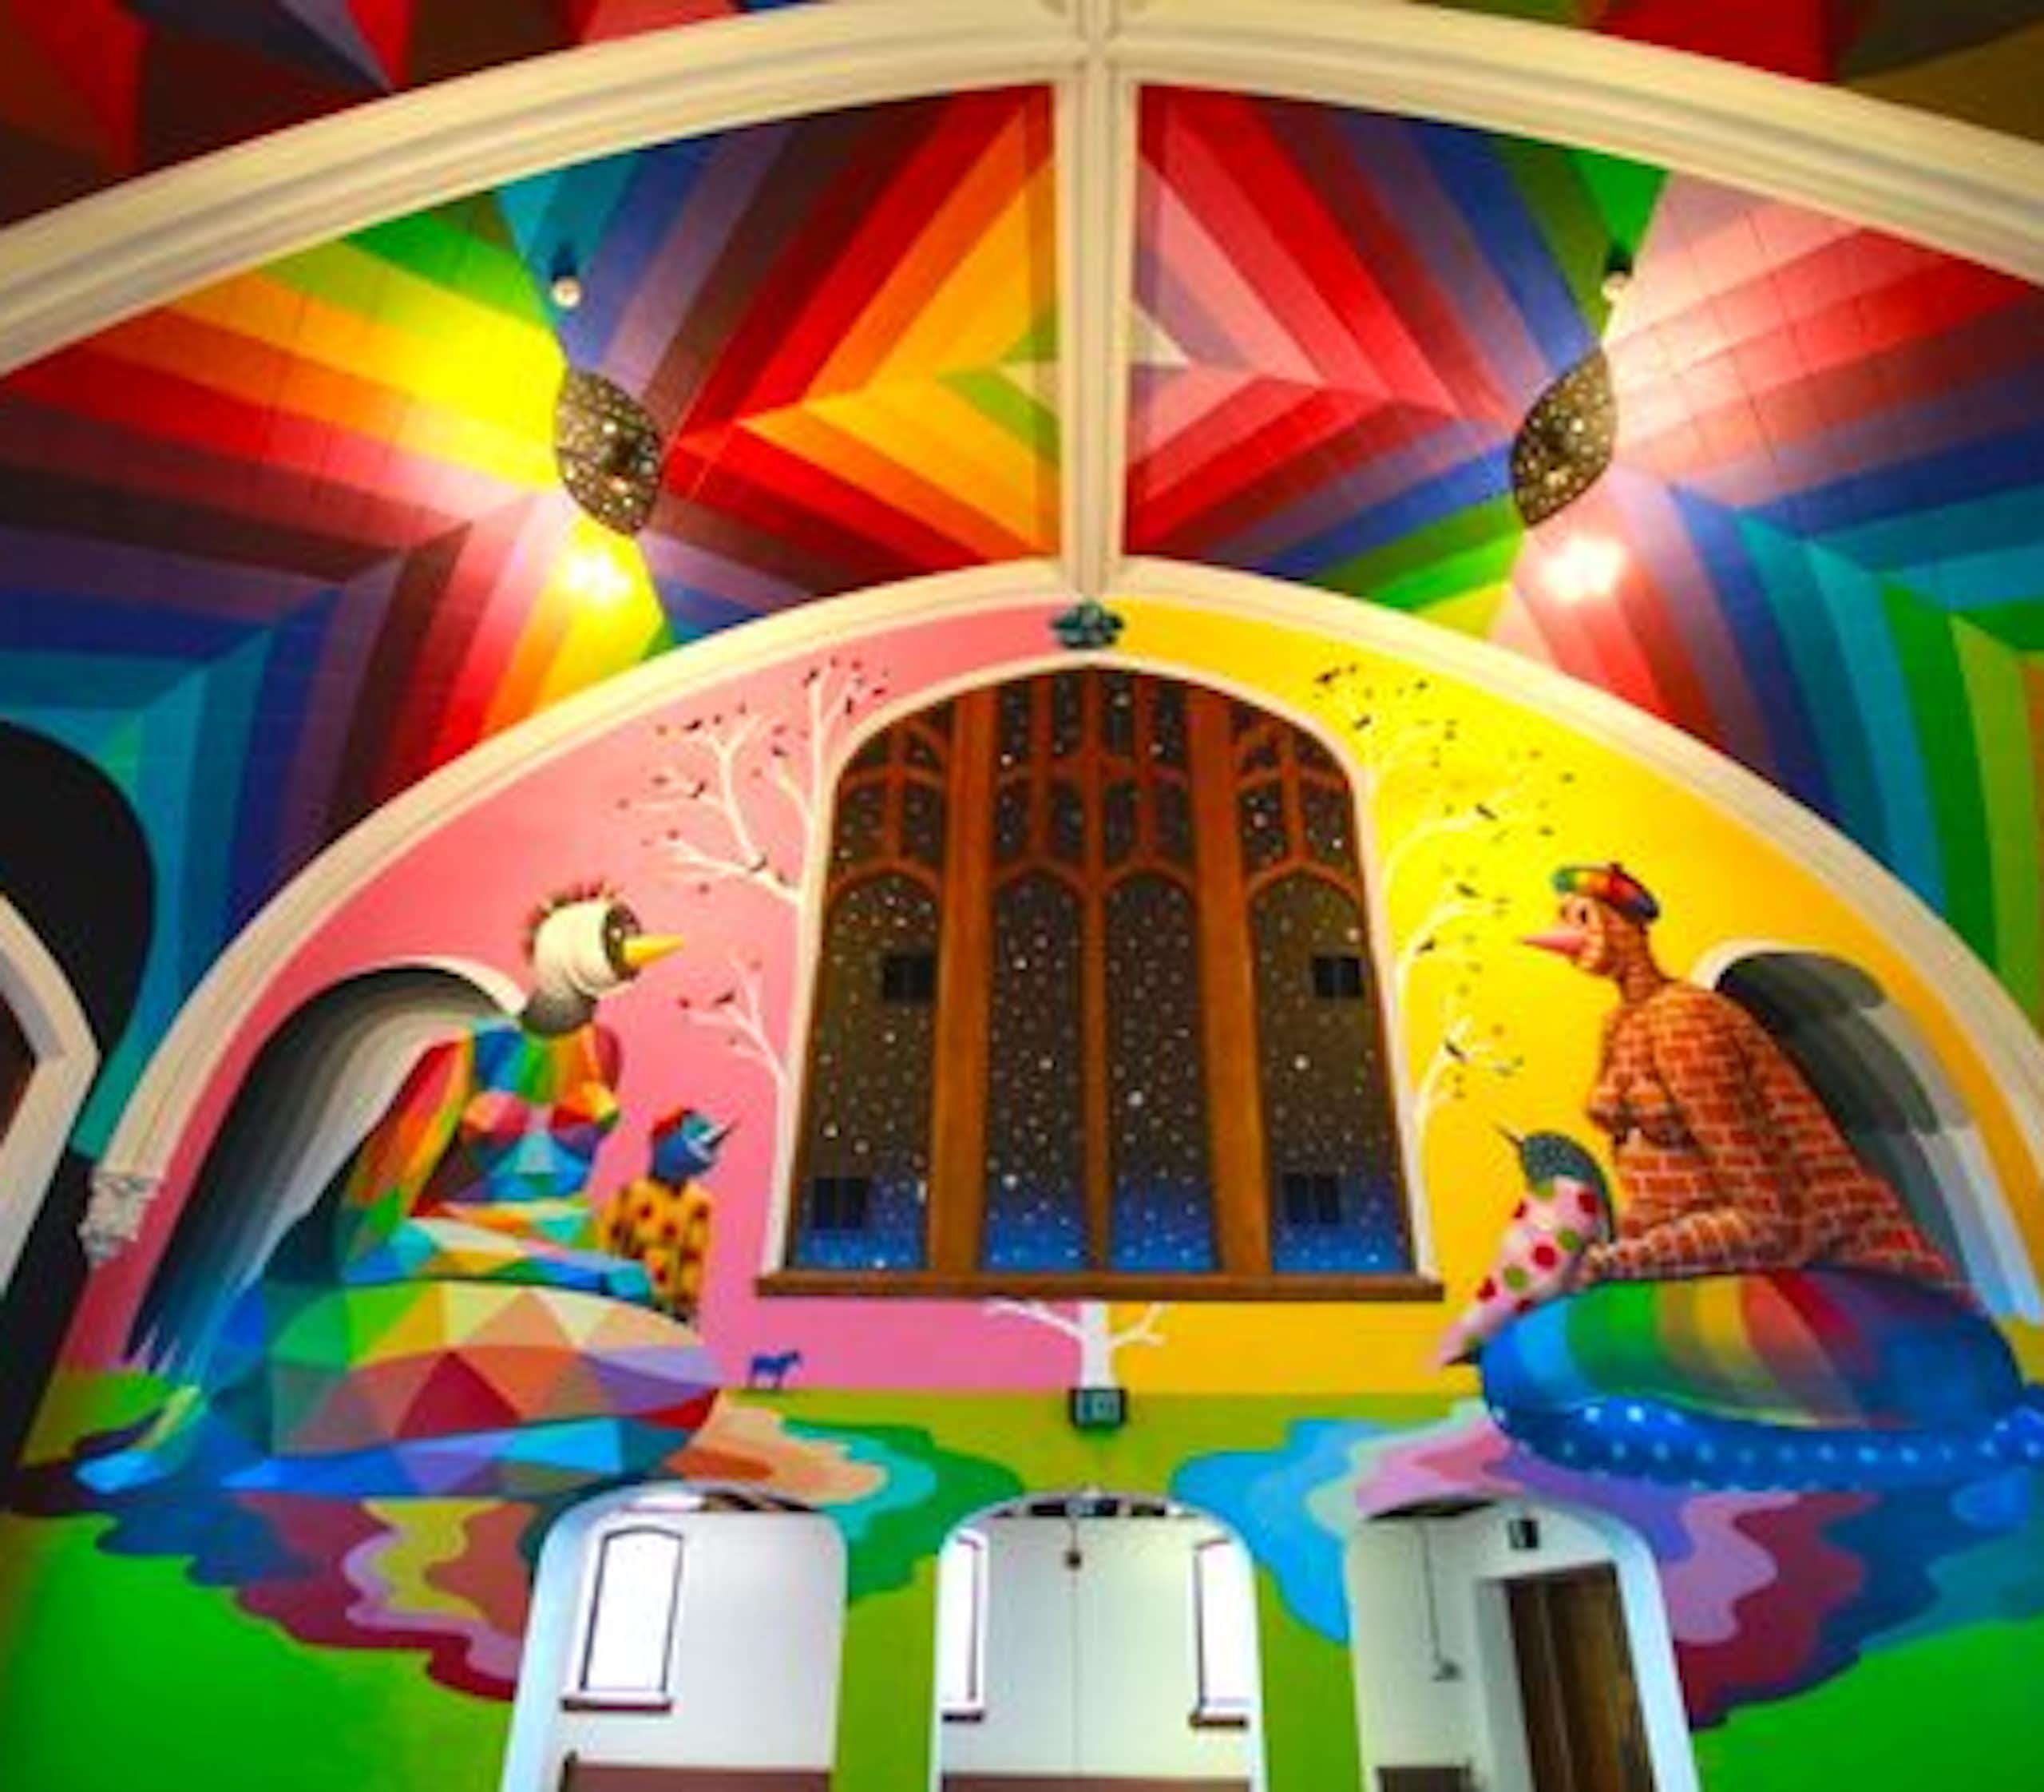 A church with a flamboyant technicolor interior, with a mural on the  wall showing two figures smoking weed.